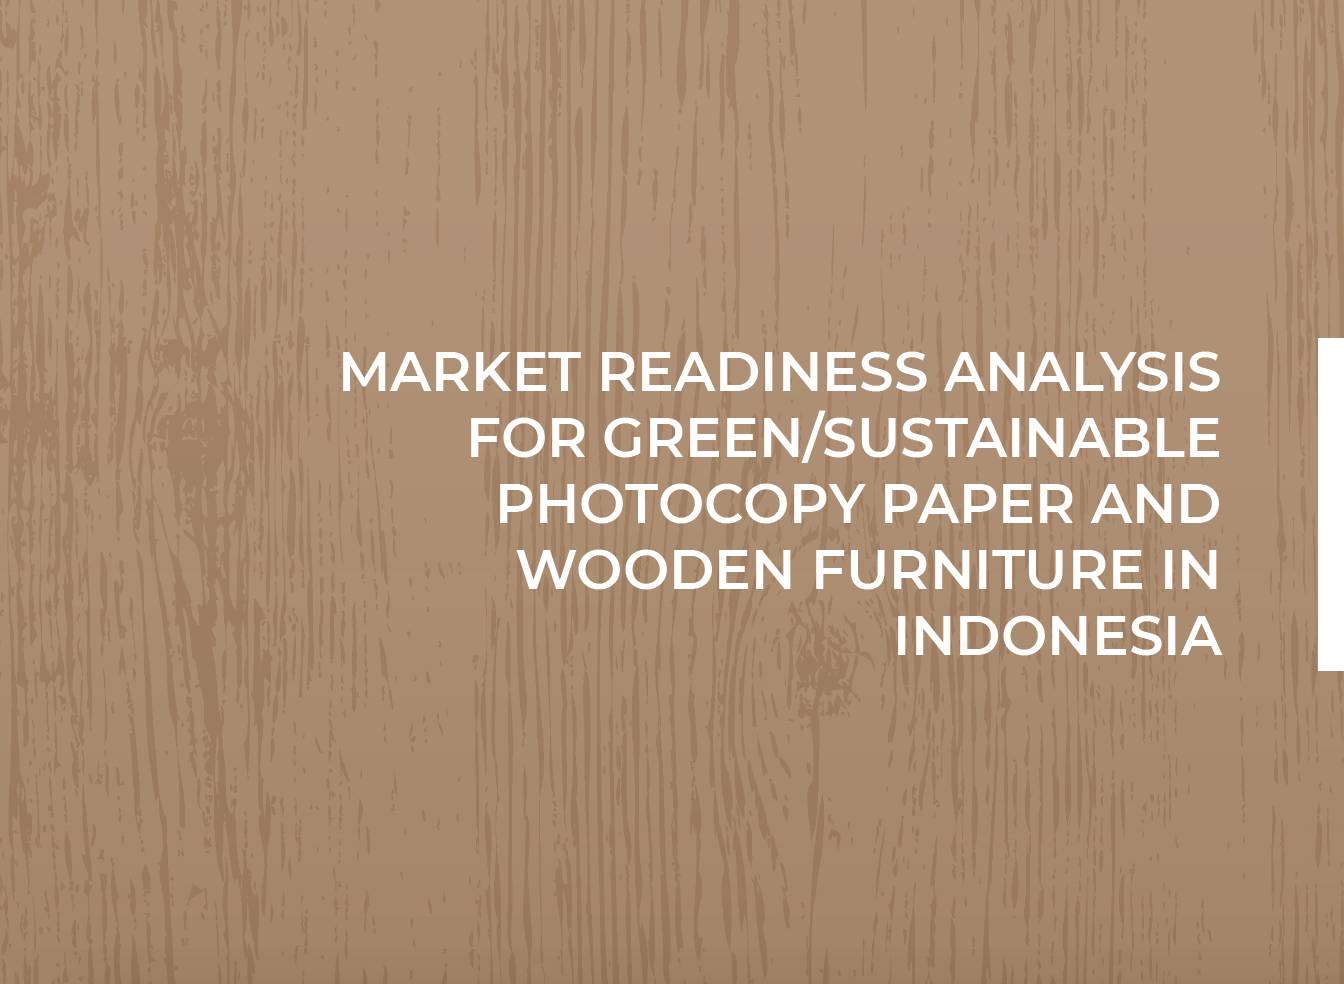 Market Readiness Analysis for Green/ Sustainable Photocopy Paper and Wooden Furniture in Indonesia